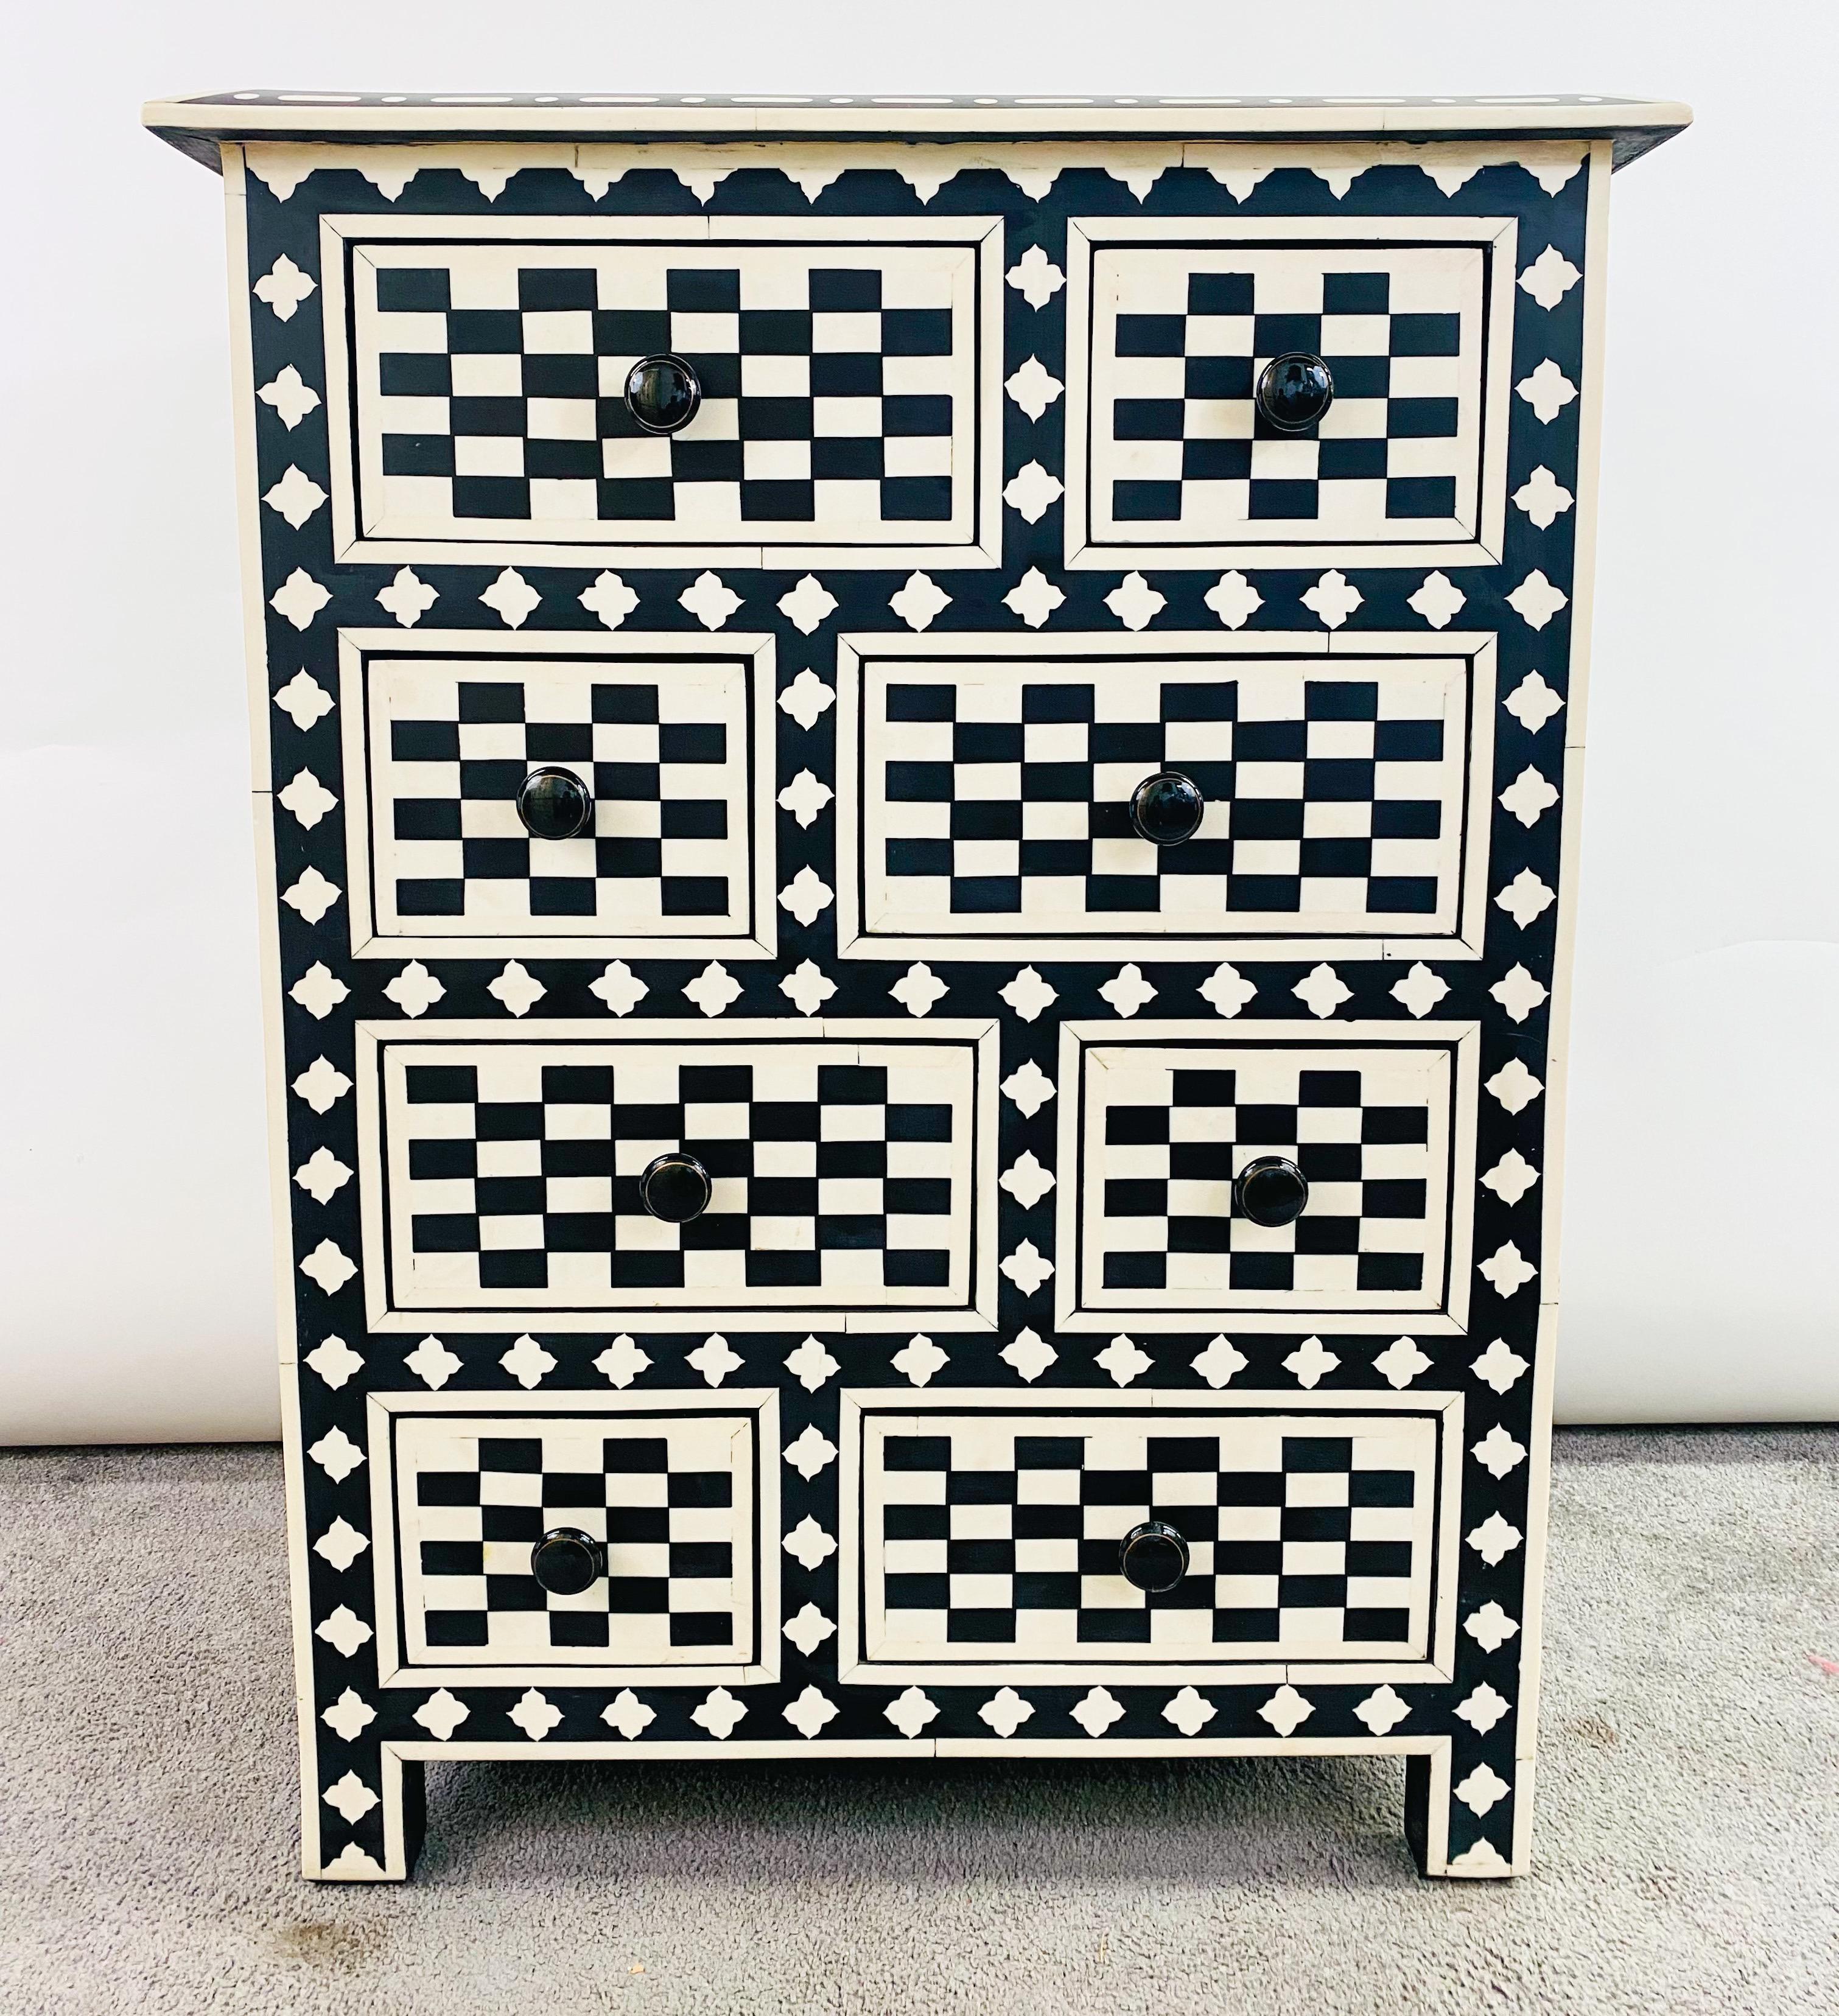 A delightful Art Deco style dresser, commode or chest featuring checkers motifs in black and white. The beautiful chest or dresser offers 8 drawers in total in two different sizes creating a stylish look. The sturdy chest or dresser is hand made of